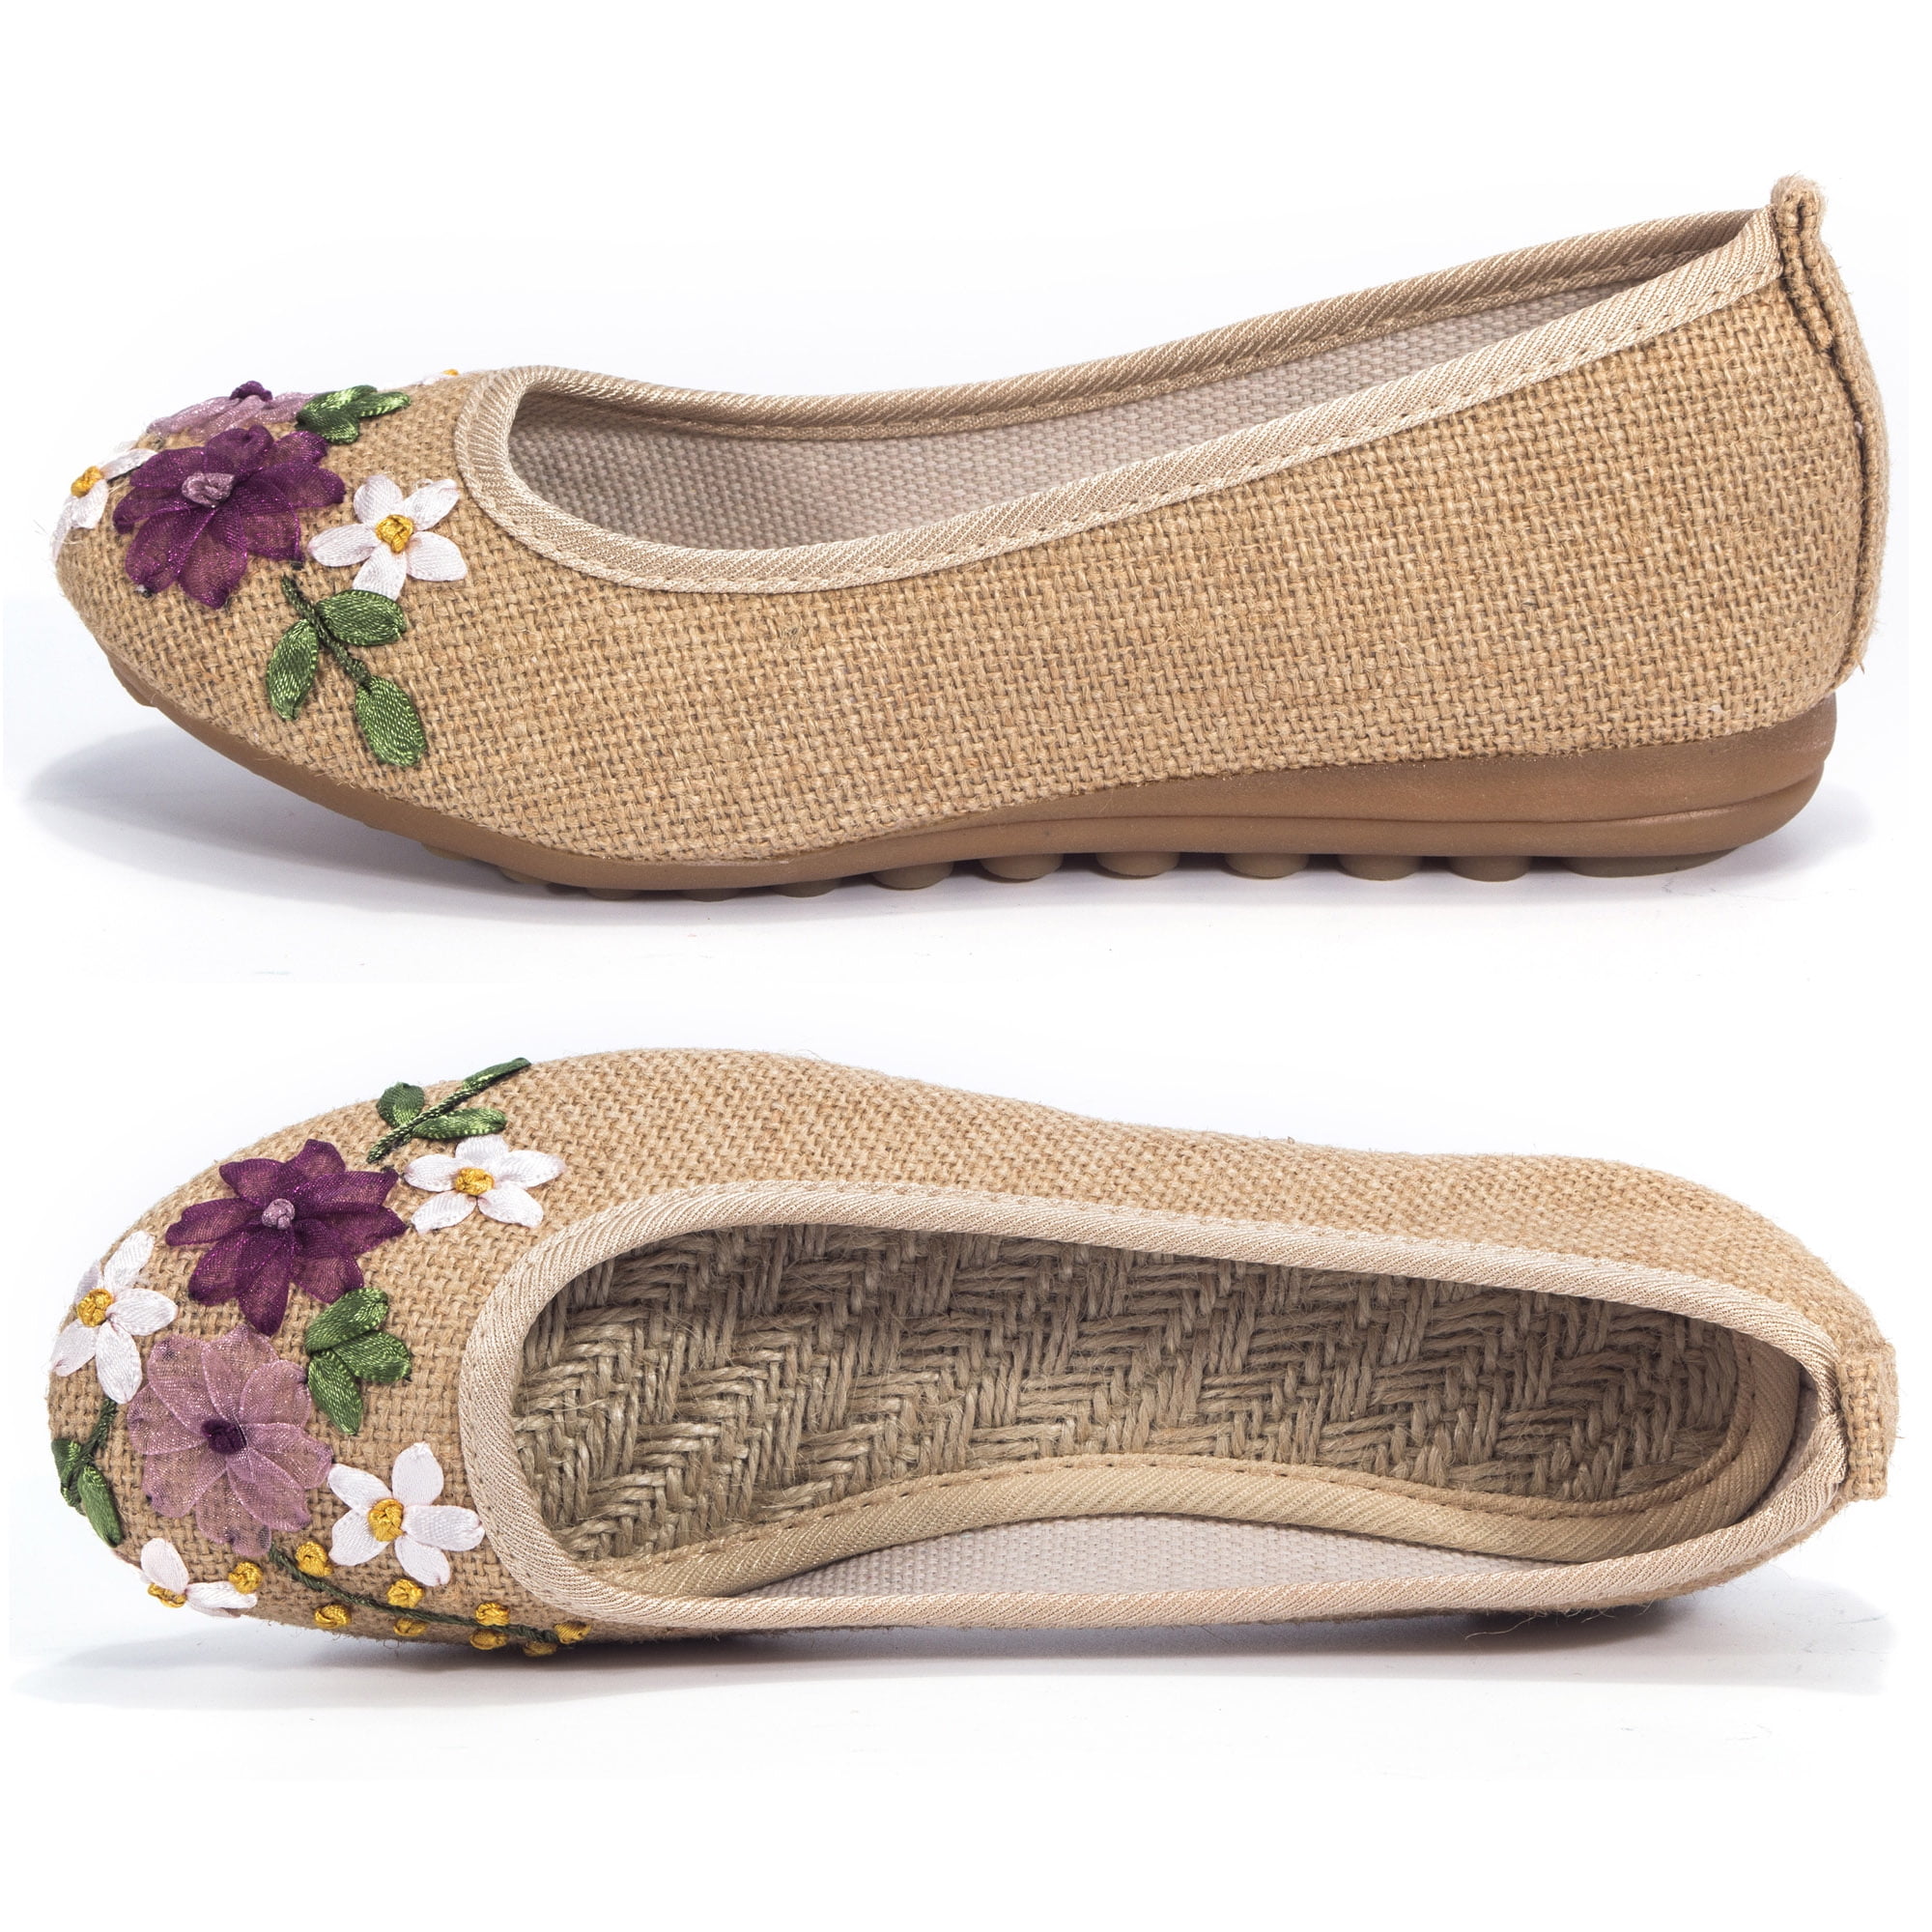 Womens Round Toe Canvas Embroidery Flowers Slip on Flats Loafers Shoes Plus Size 